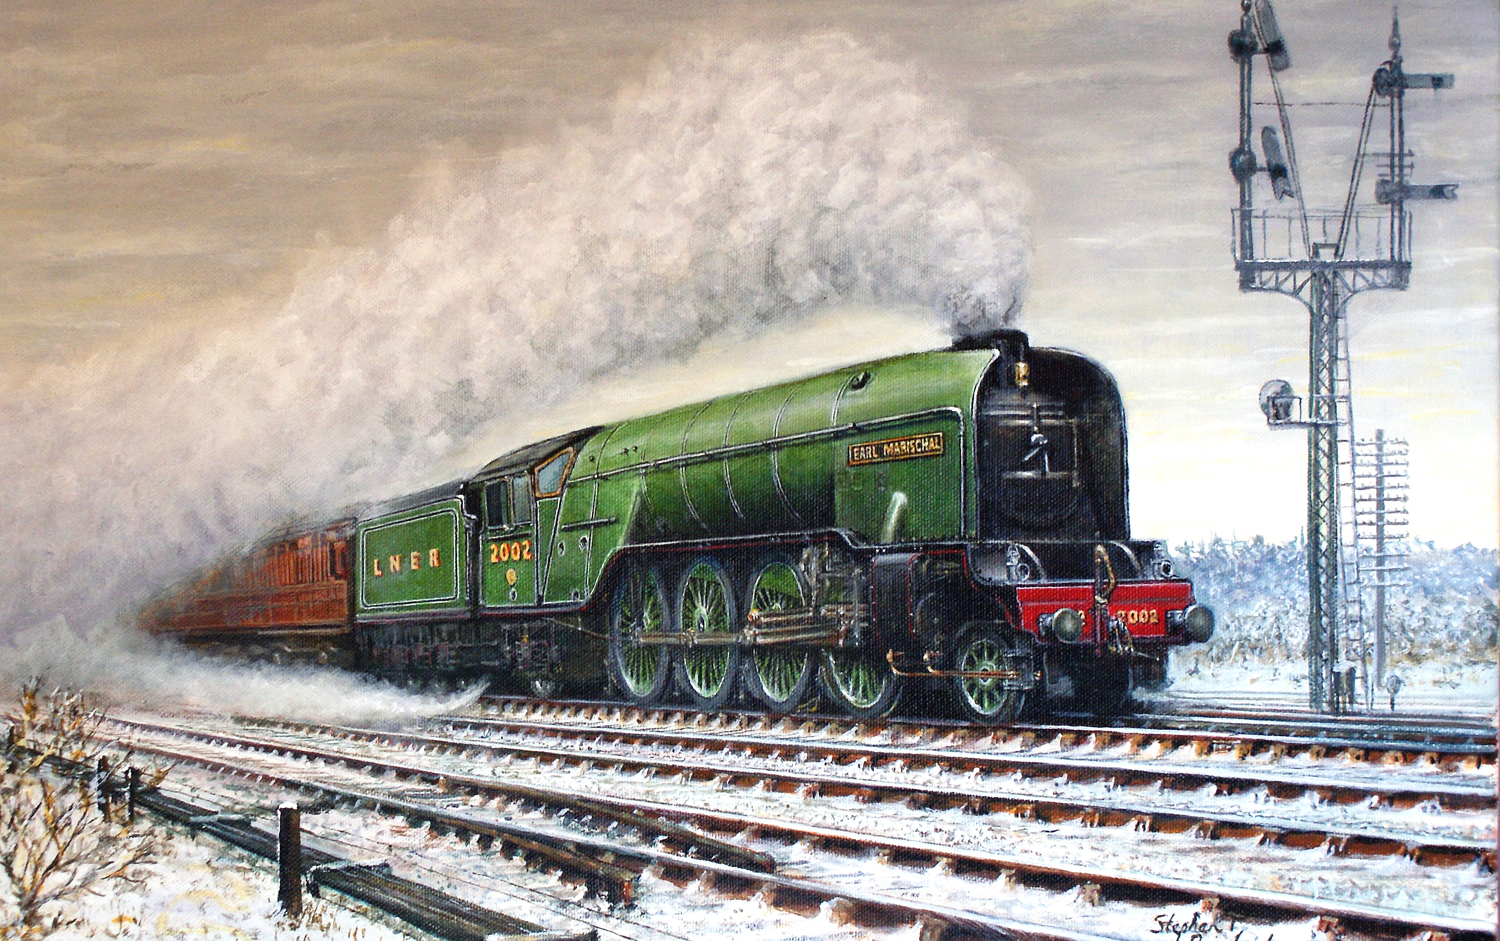 Aycliffe Painter Exhibits at Locomotion Museum